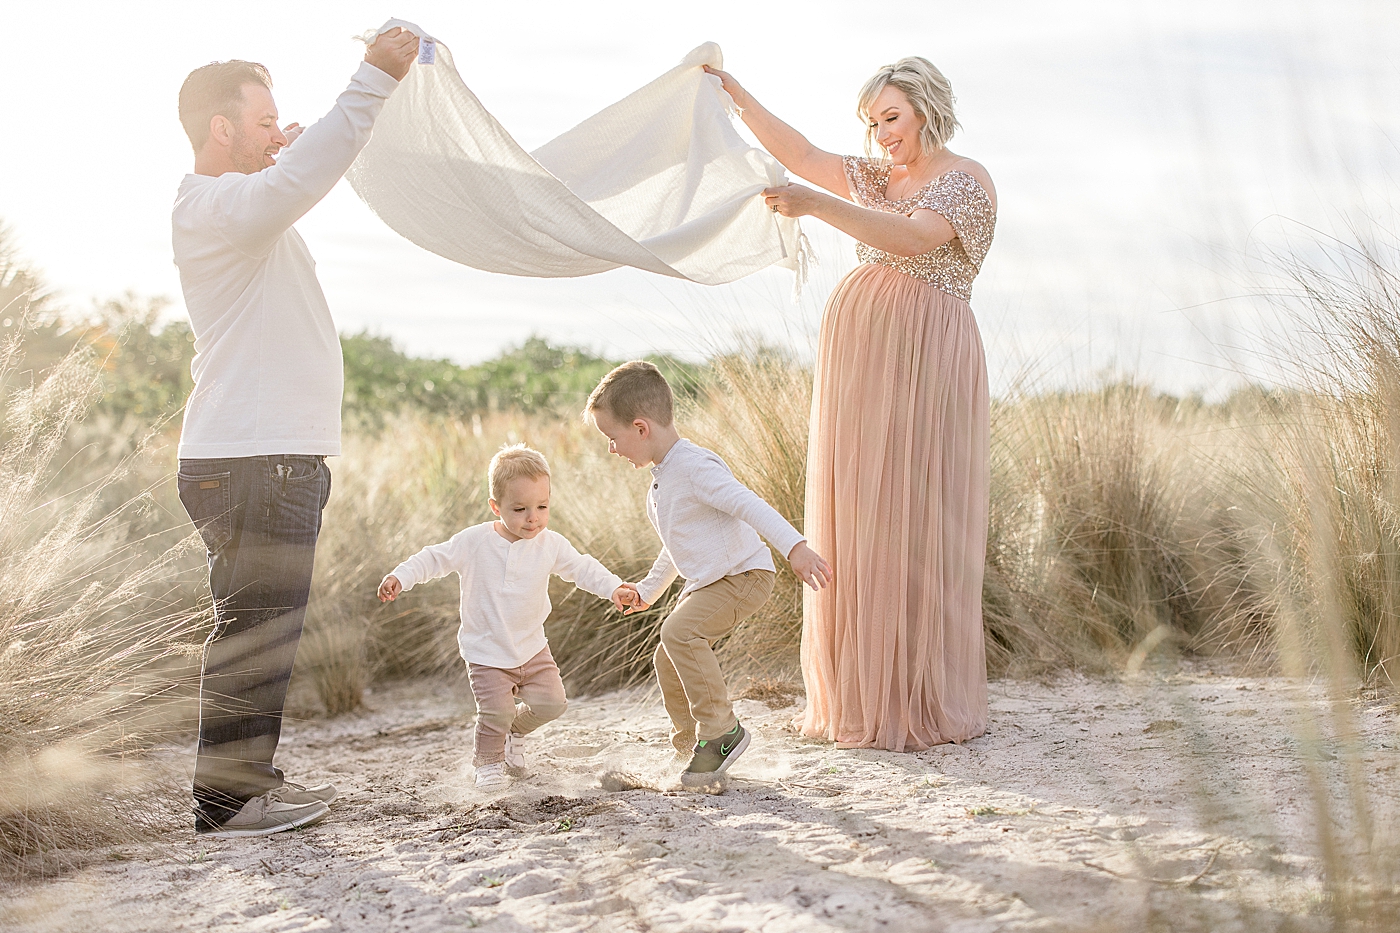 Two boys running under blanket Mom and Dad are holding. Sun is setting behind them. Photo by Brittany Elise Photography.